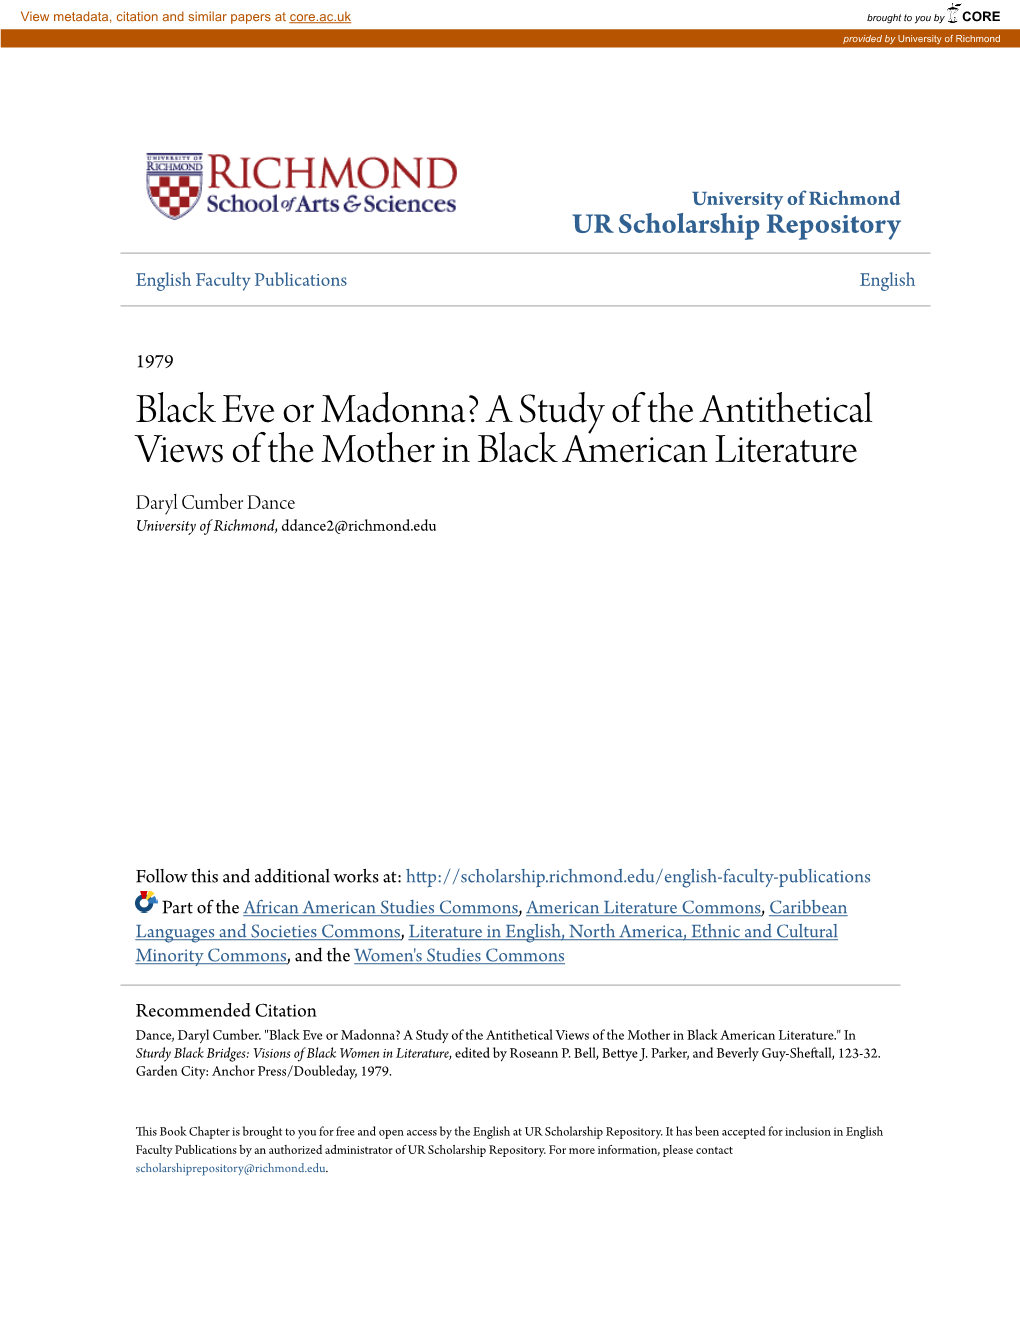 Black Eve Or Madonna? a Study of the Antithetical Views of the Mother in Black American Literature Daryl Cumber Dance University of Richmond, Ddance2@Richmond.Edu